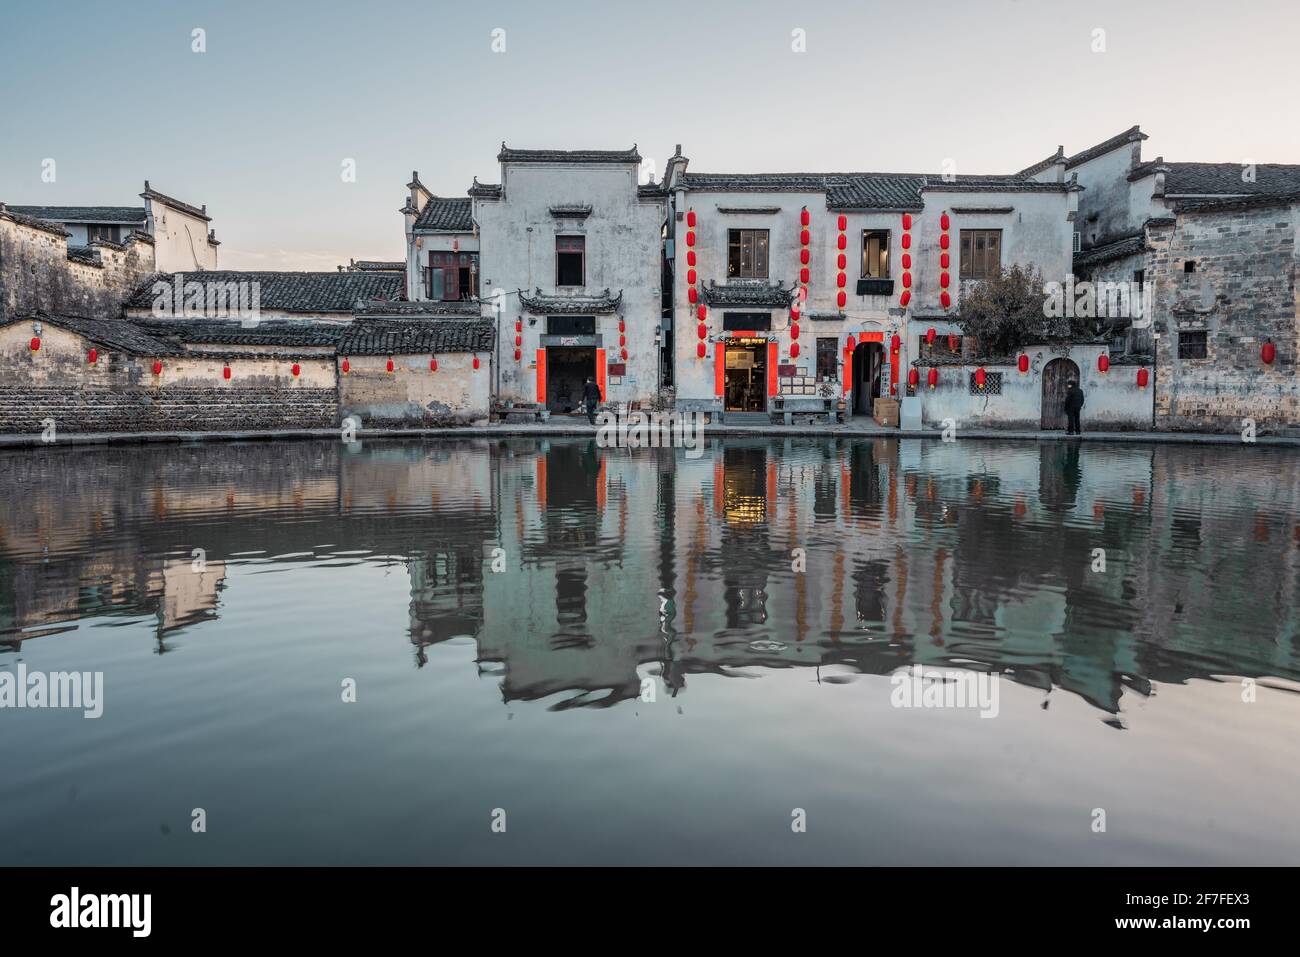 Hongcun village, a historic ancient village in Anhui province, China, at sunset time. Stock Photo